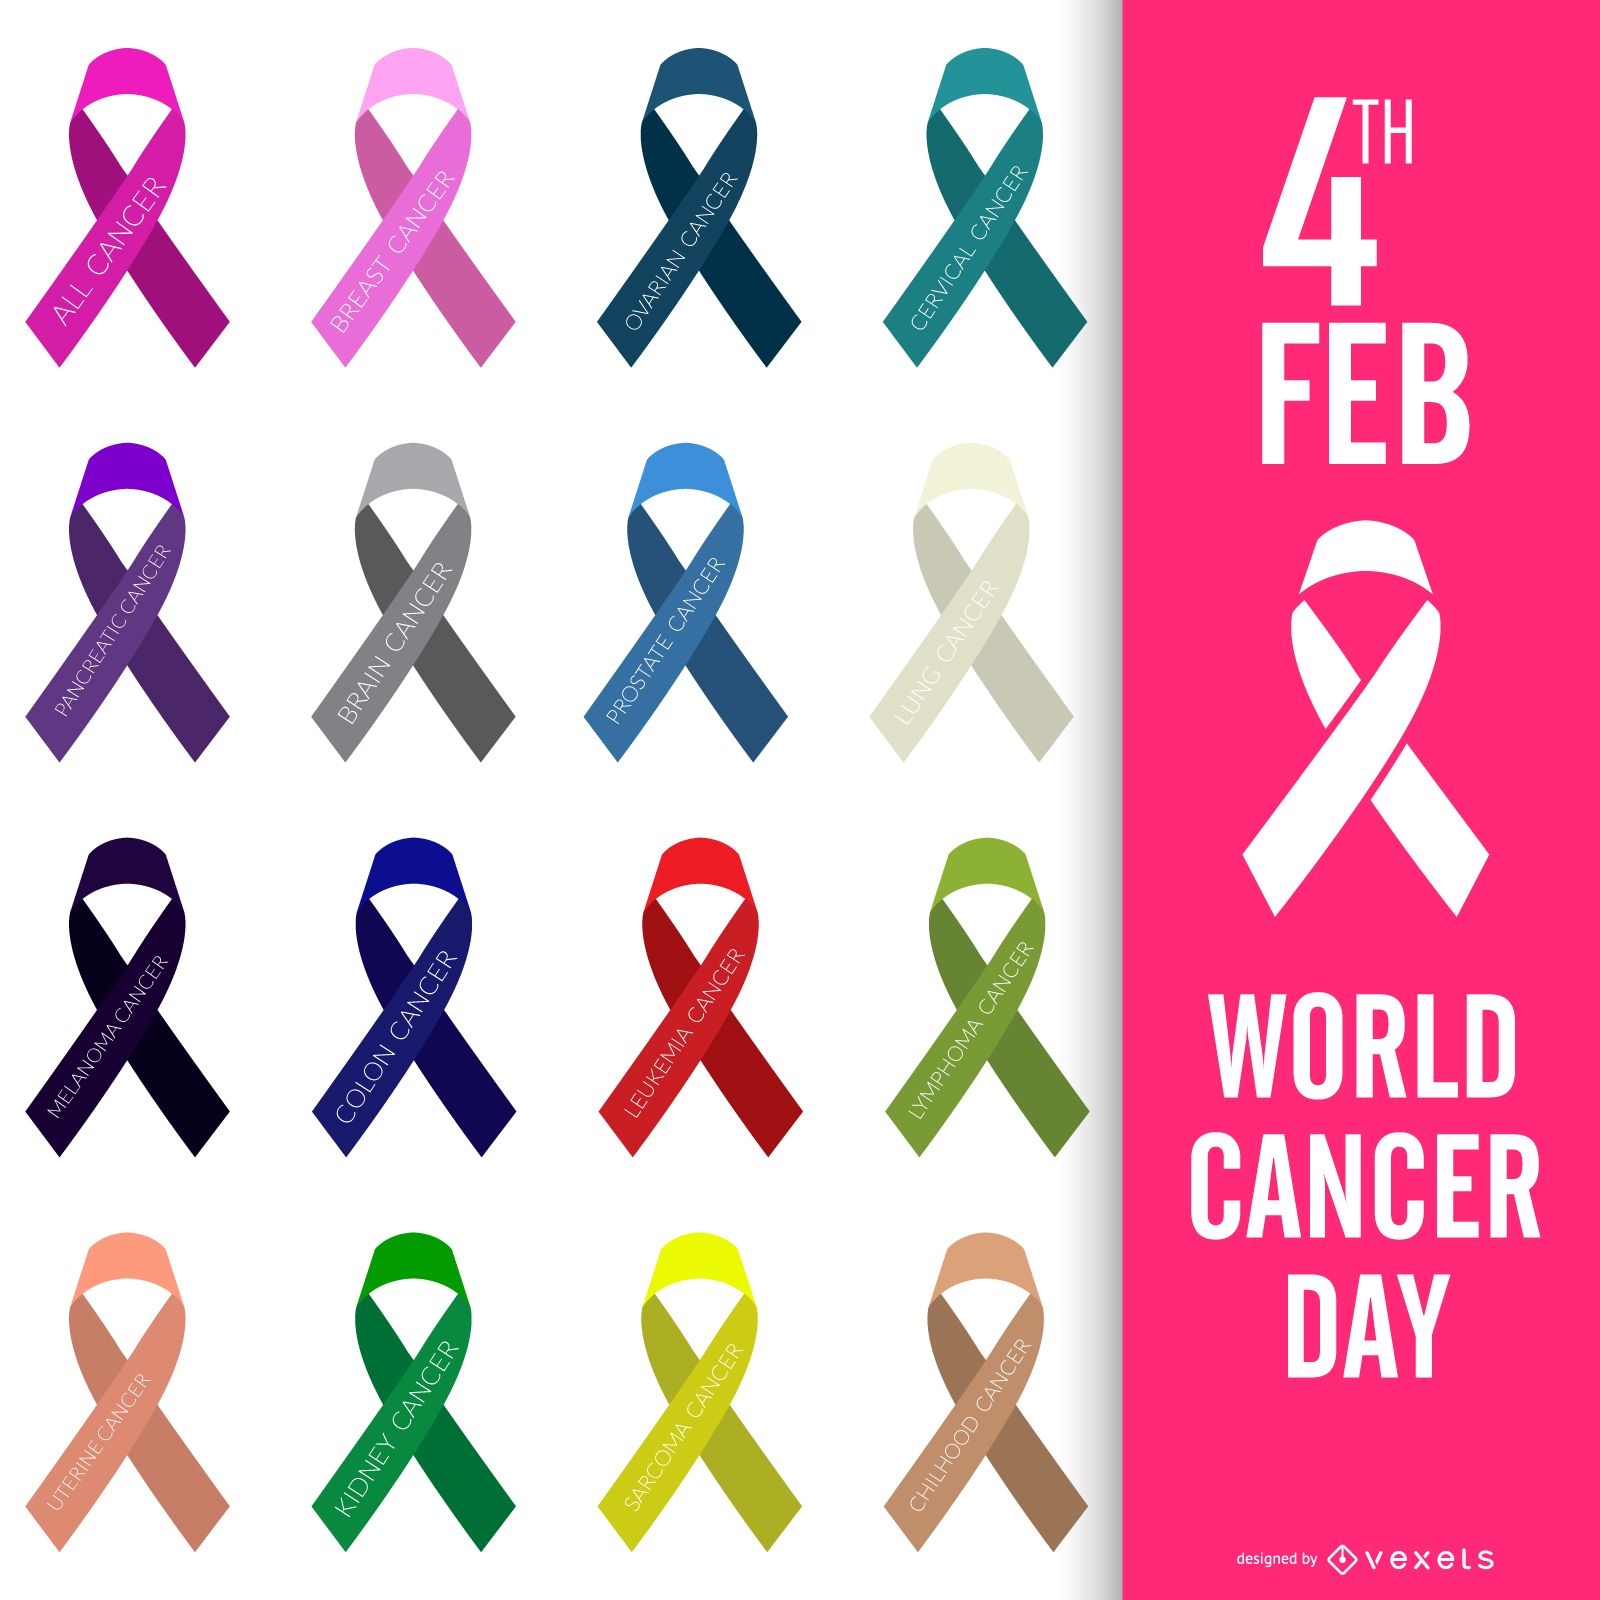 World Cancer Day flyer colored ribbons